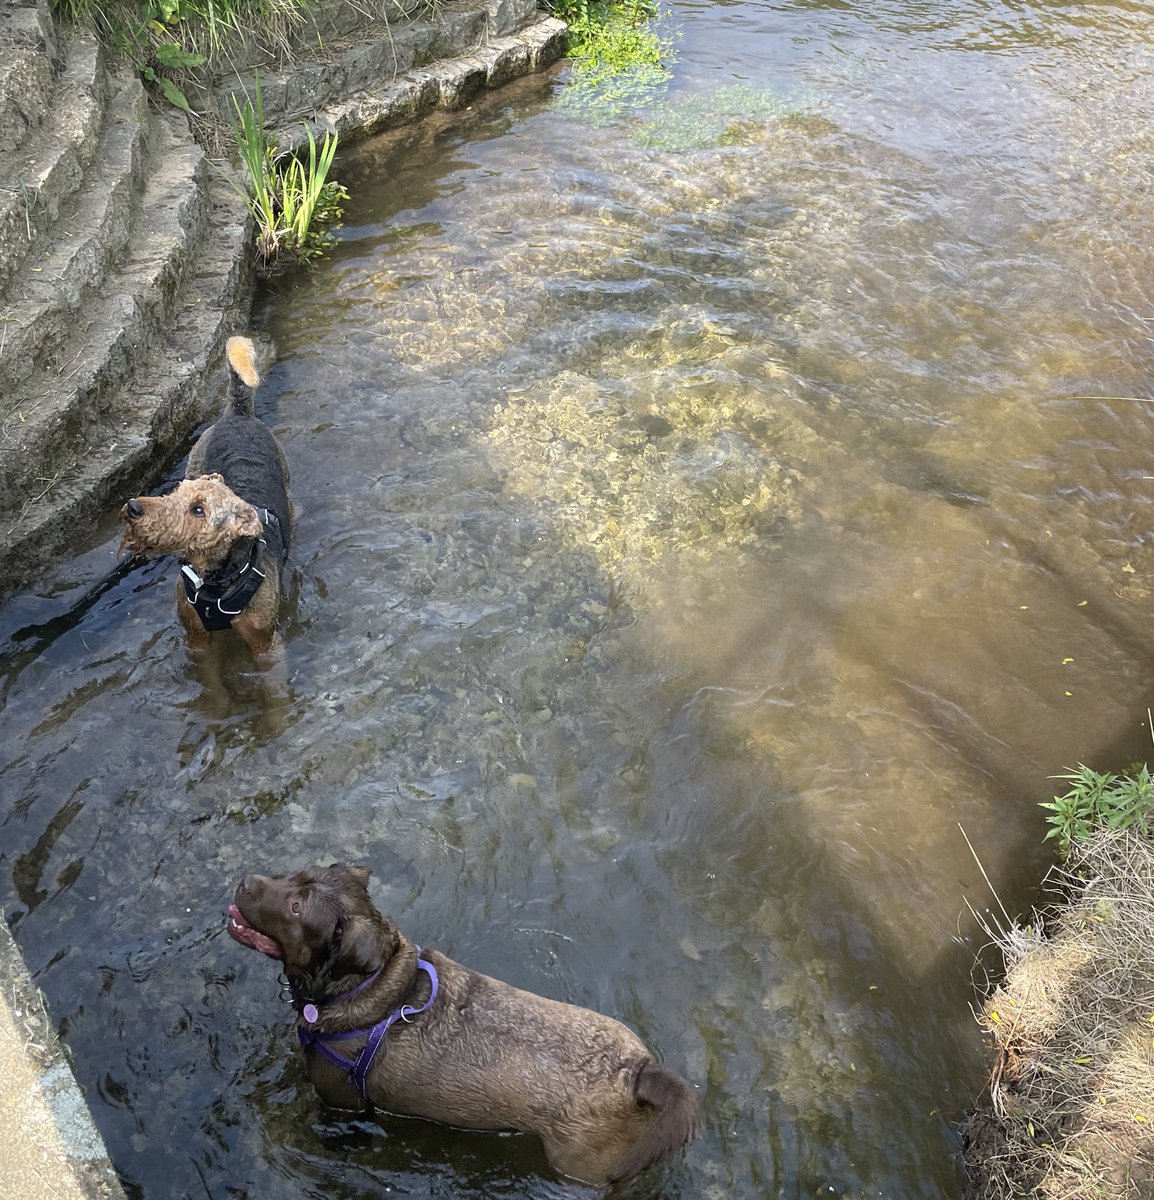 Lovely sunny day for a walk, doing a Dudley @BletchleyBark, and a dip with a pal!!